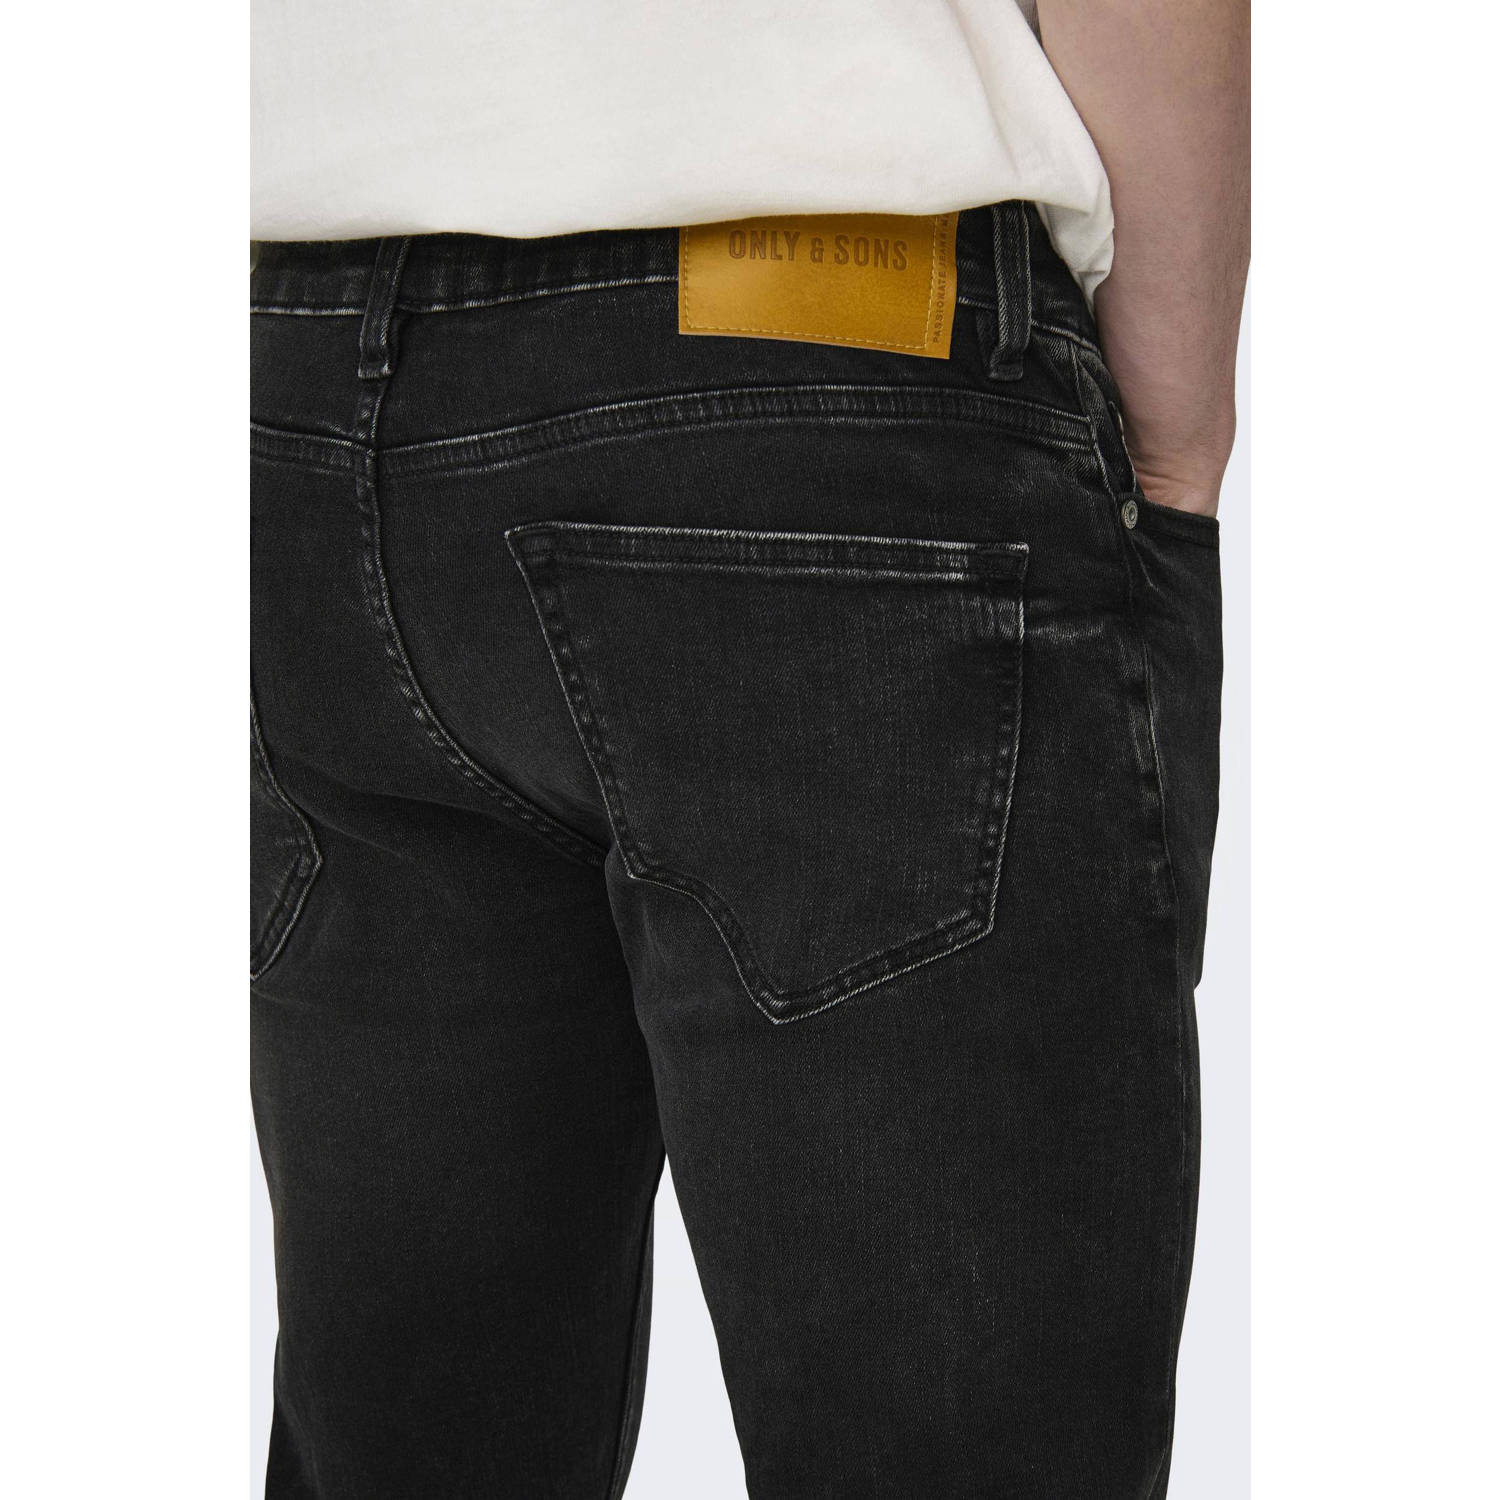 ONLY & SONS skinny jeans ONSWARP 9095 washed black